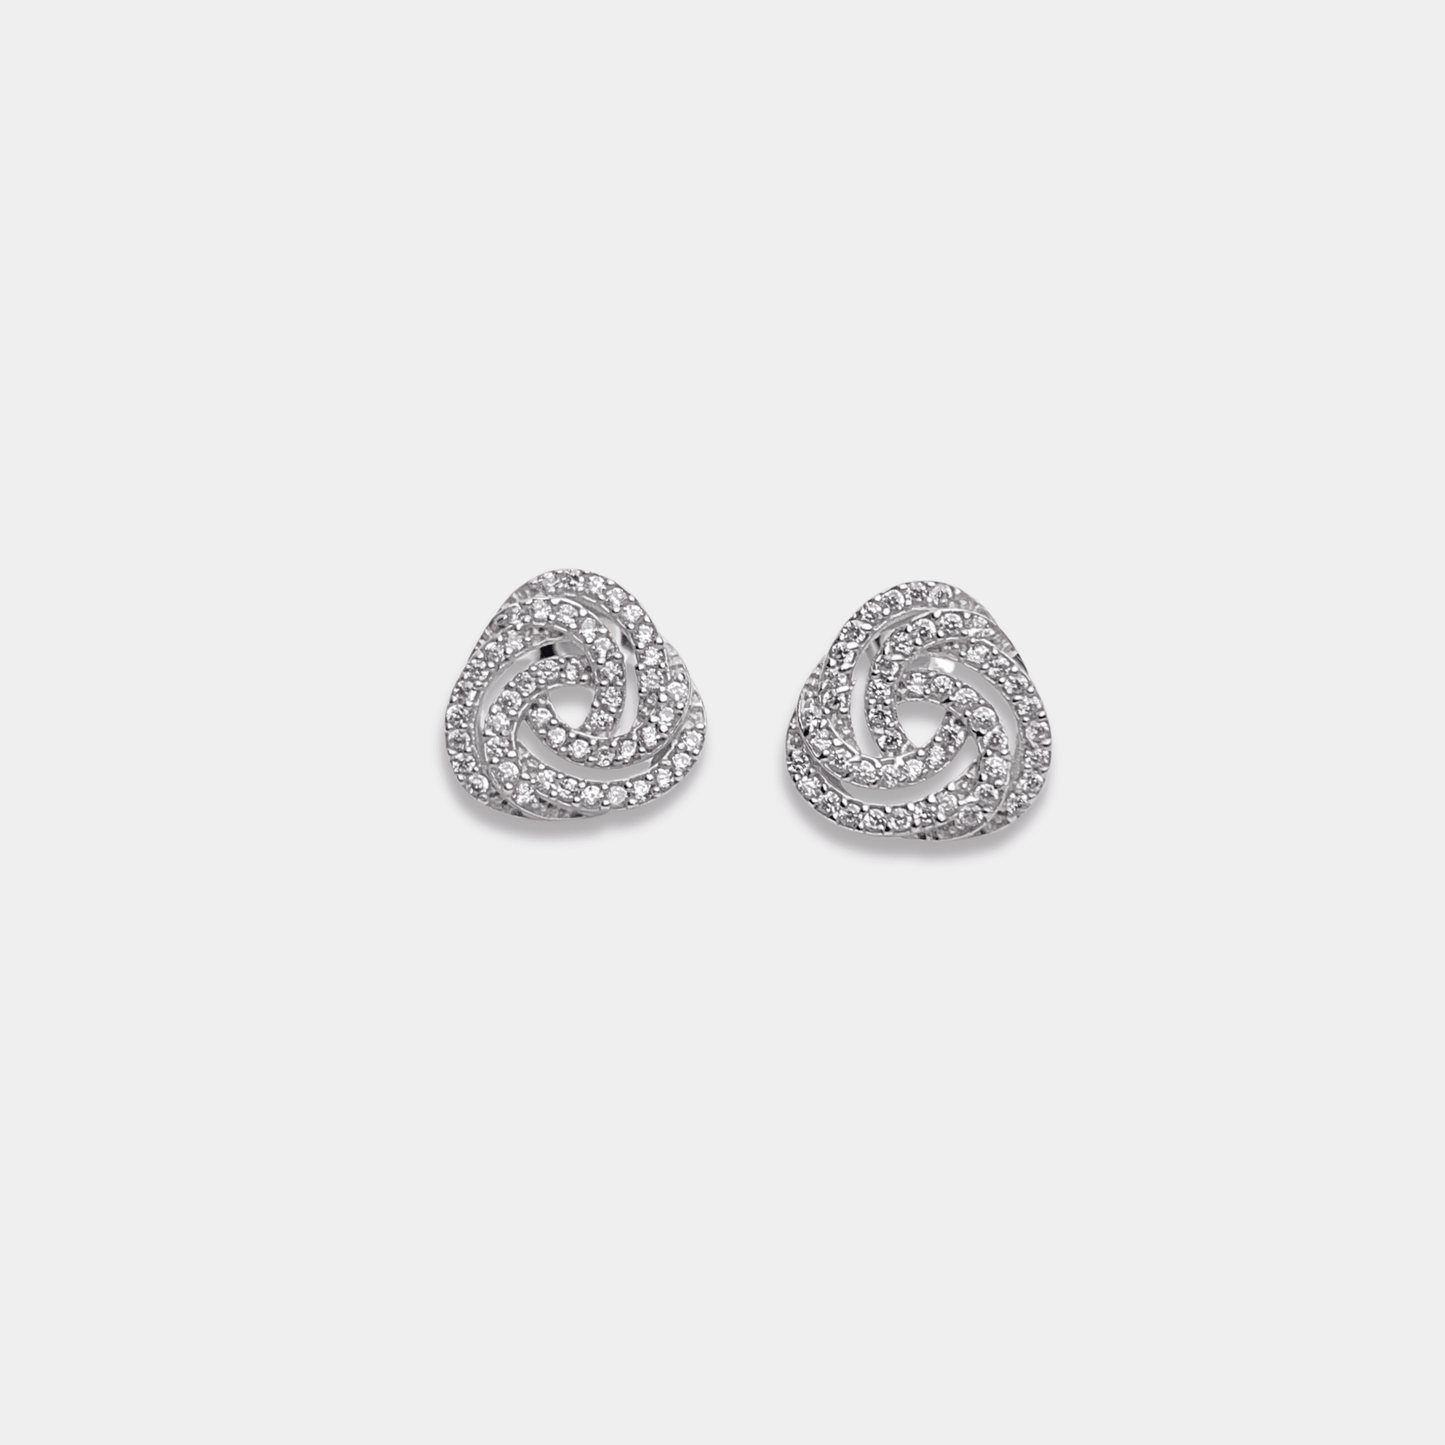 Elevate your style with these exquisite diamond stud earrings, beautifully set in sterling silver